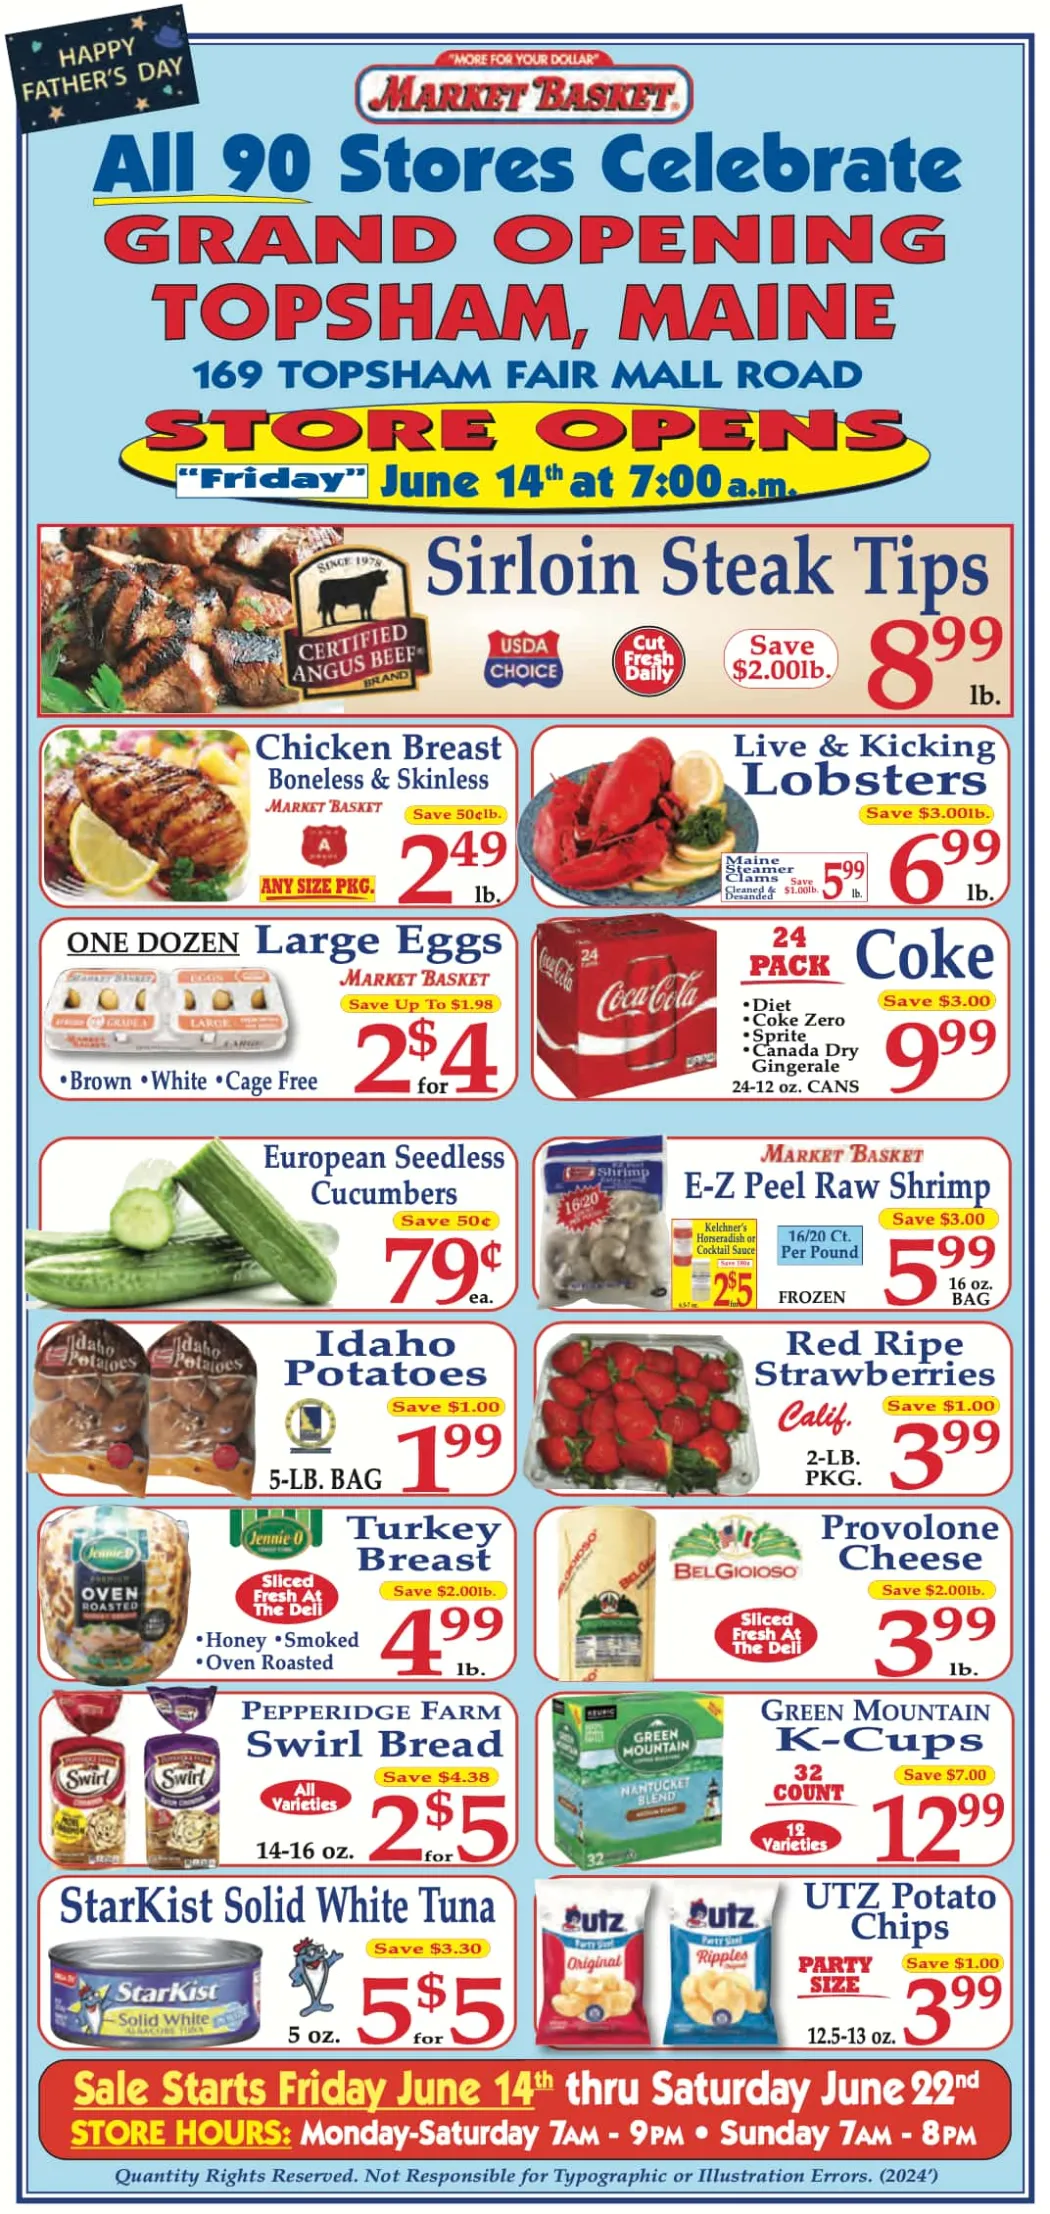 Market Basket July 2024 Weekly Sales, Deals, Discounts and Digital Coupons.